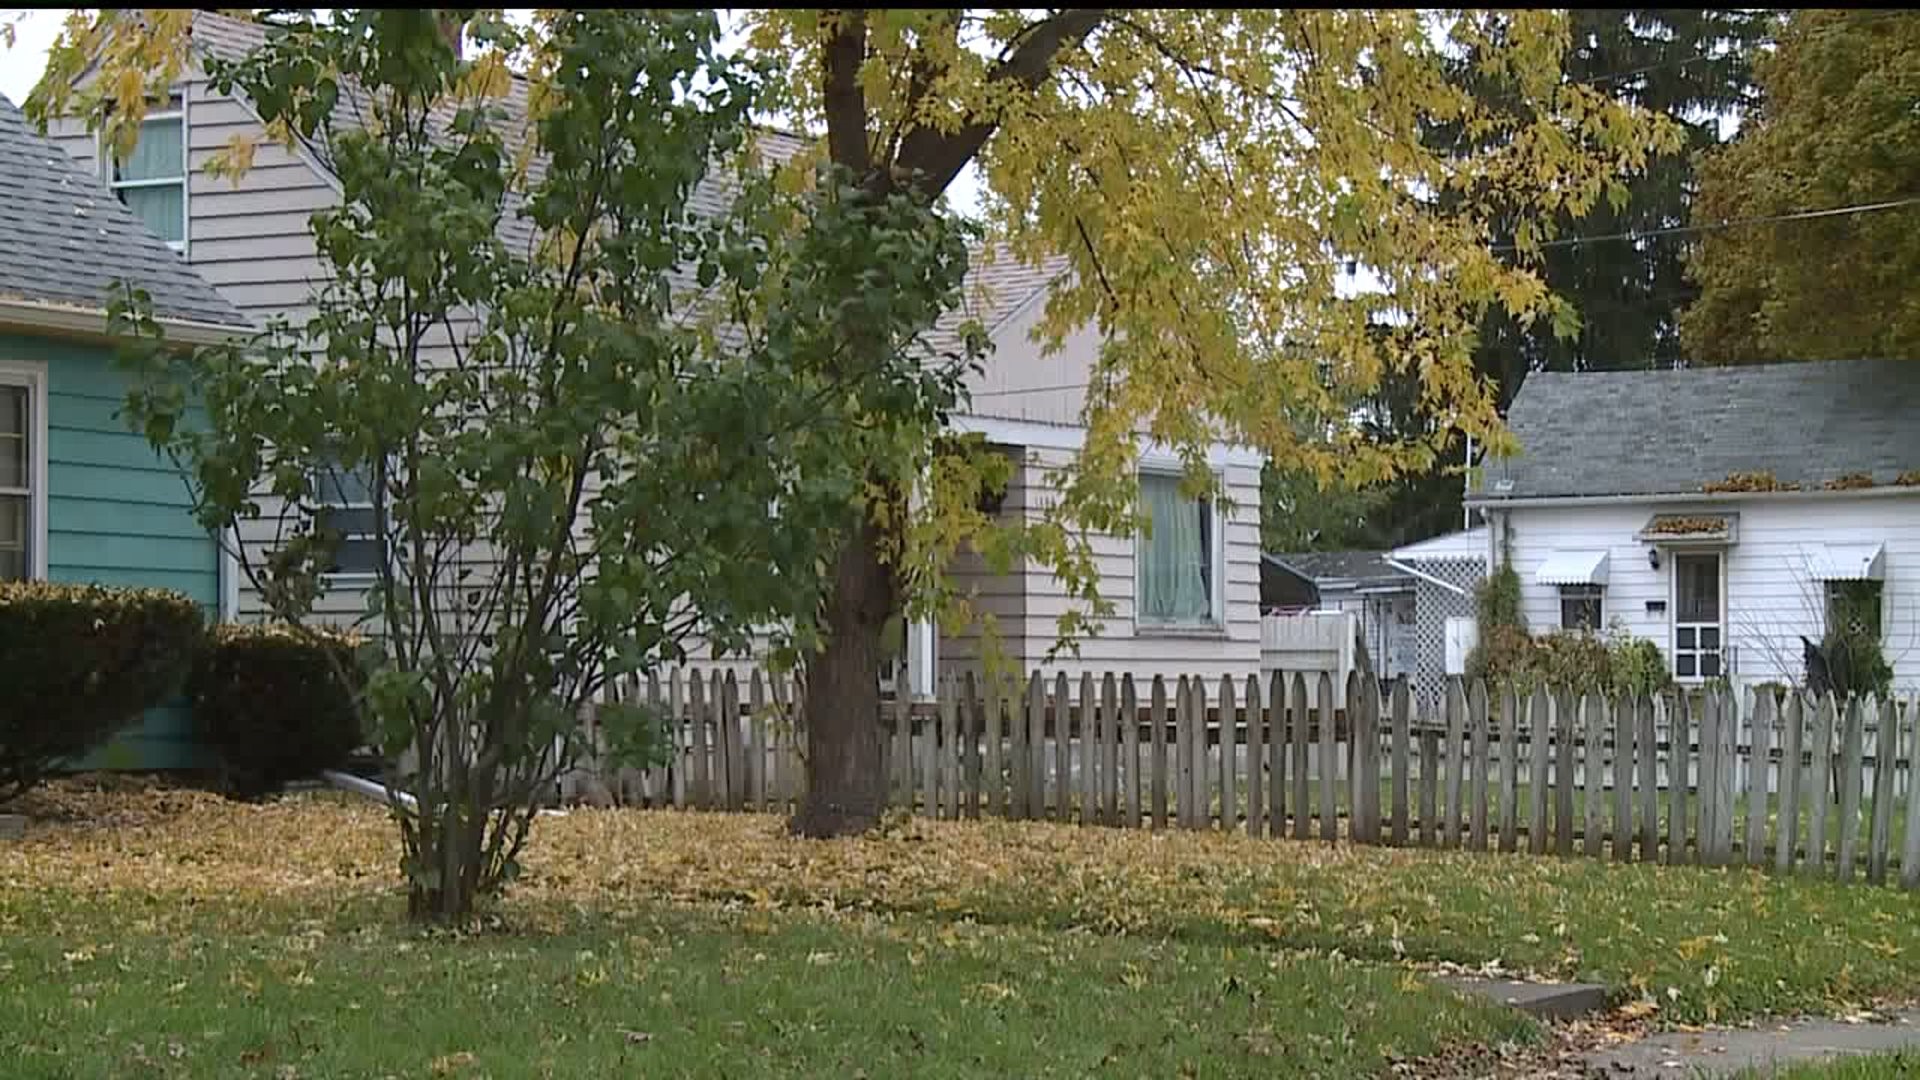 early snowfall could hurt leaves, pumpkins